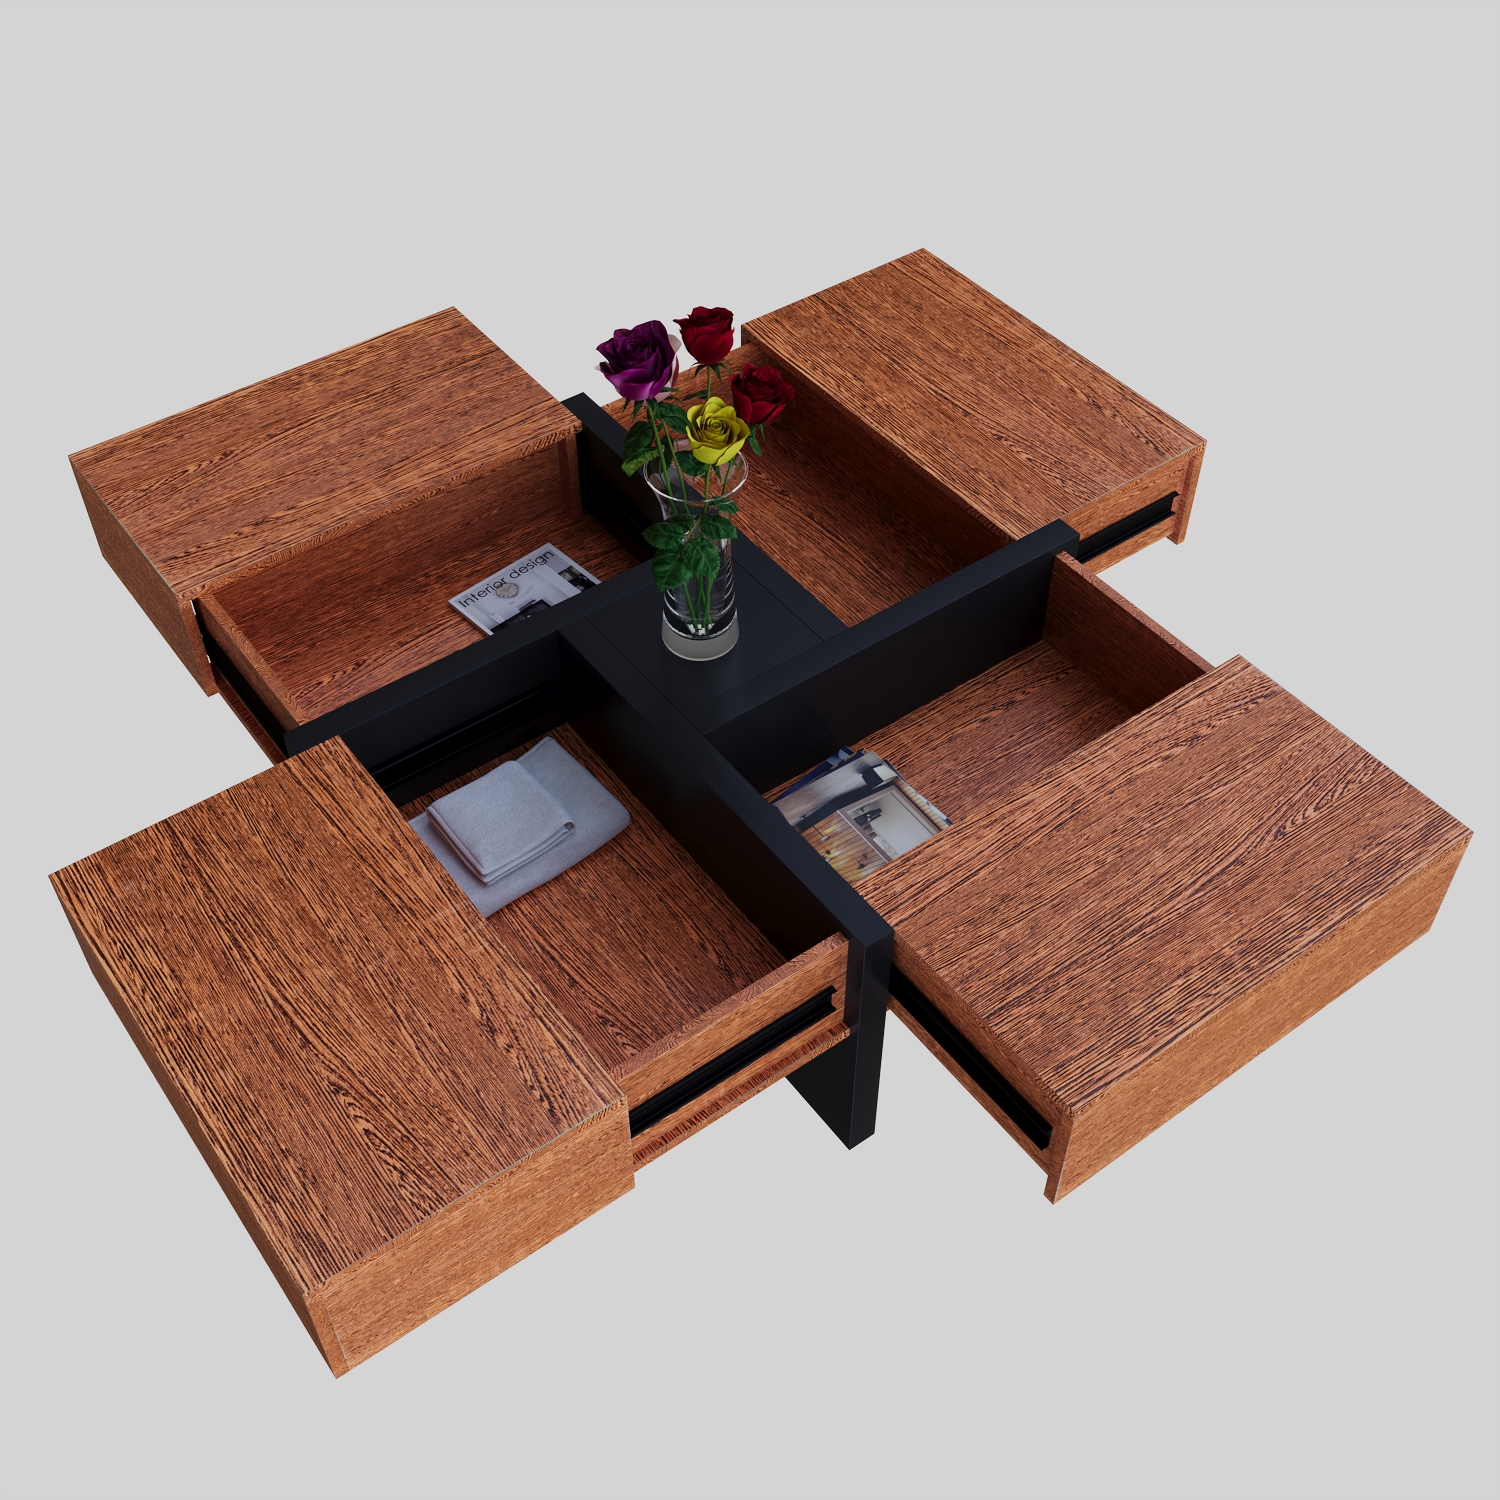 Coffee table in 3d max Corona render 9 image